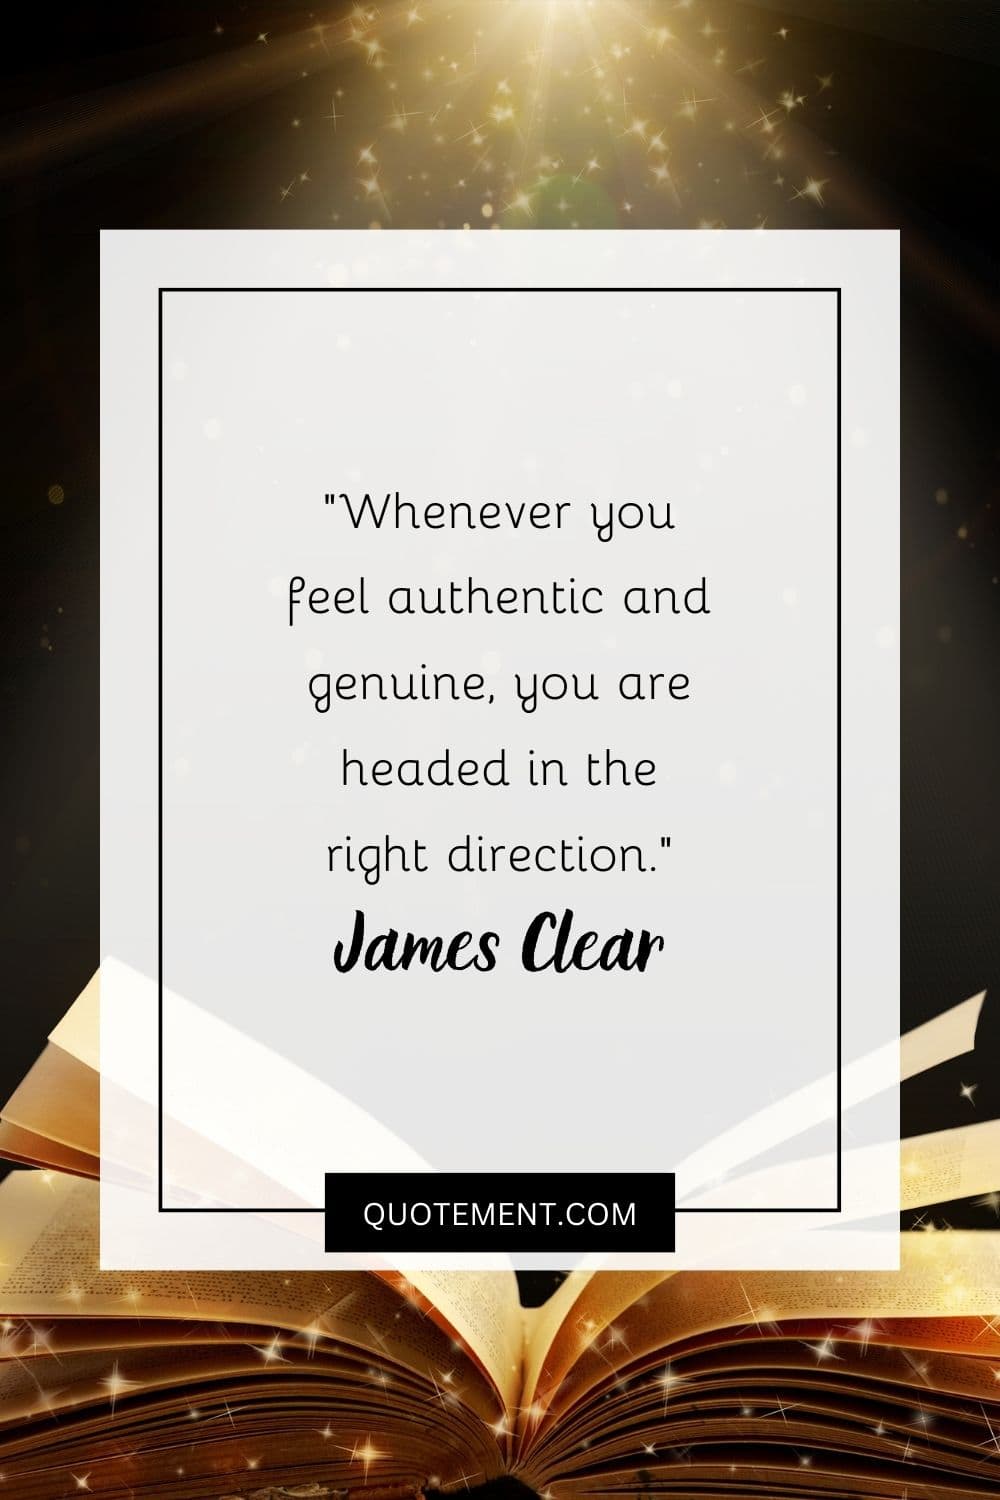 Whenever you feel authentic and genuine, you are headed in the right direction